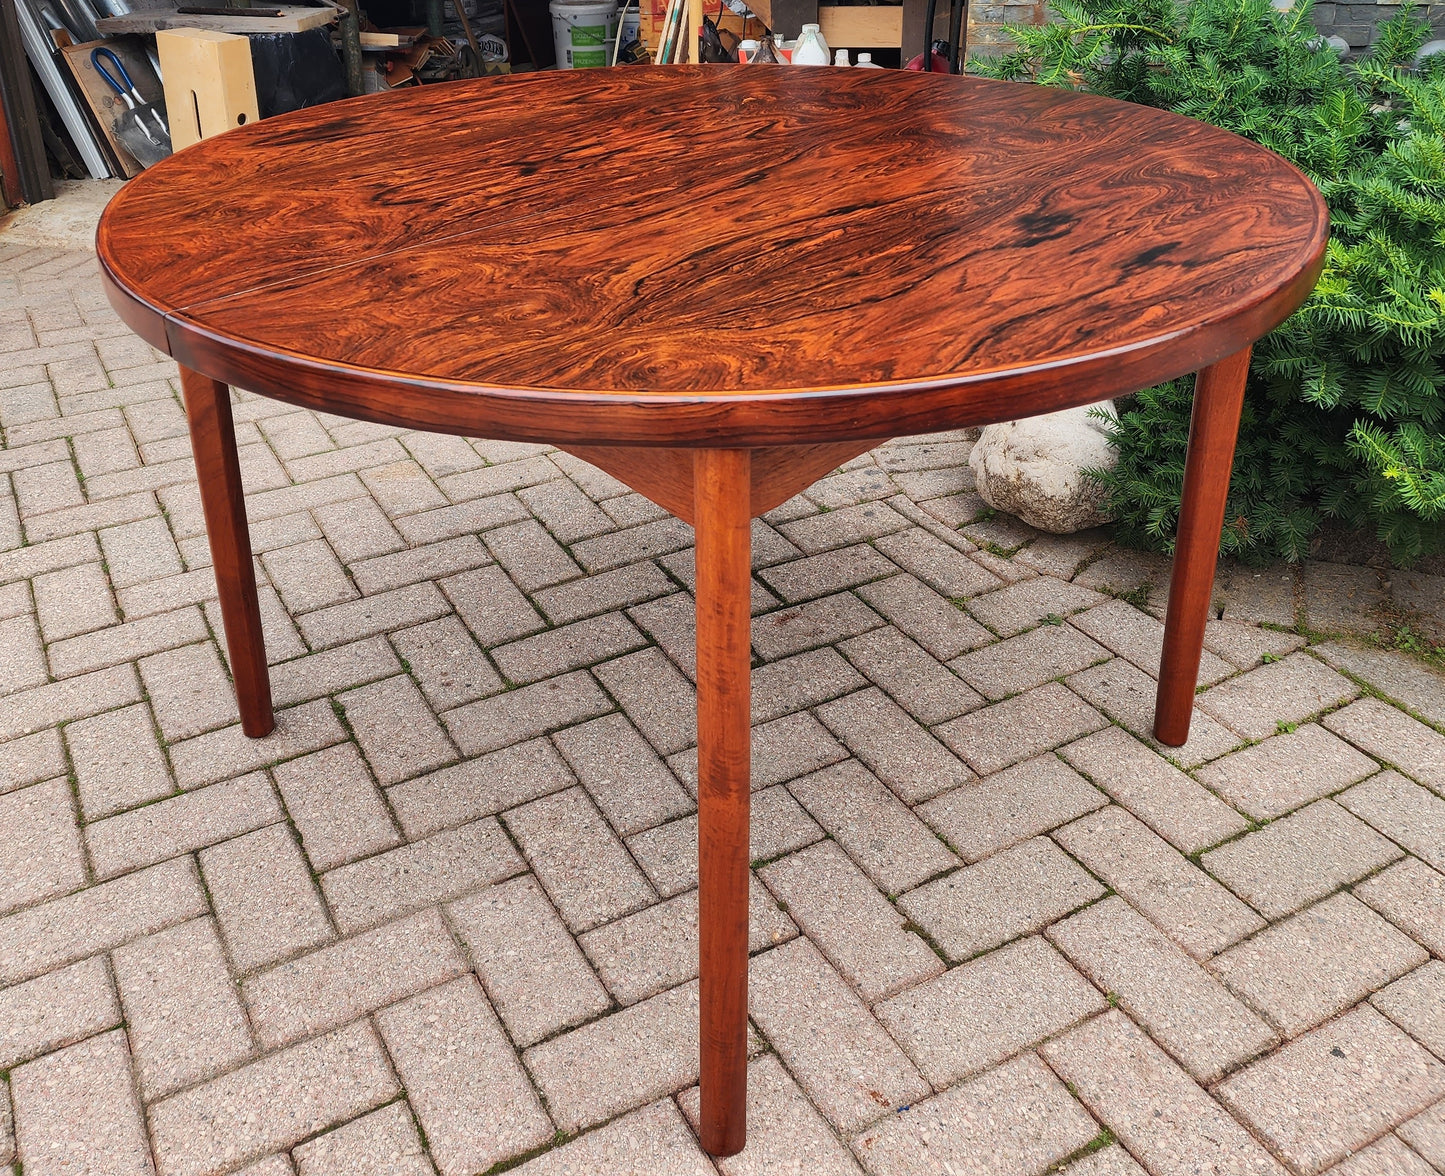 REFINISHED Danish Mid Century Modern Rio Rosewood Table Round to Oval  2 Leaves by H. Kjaernulf 47"-86"